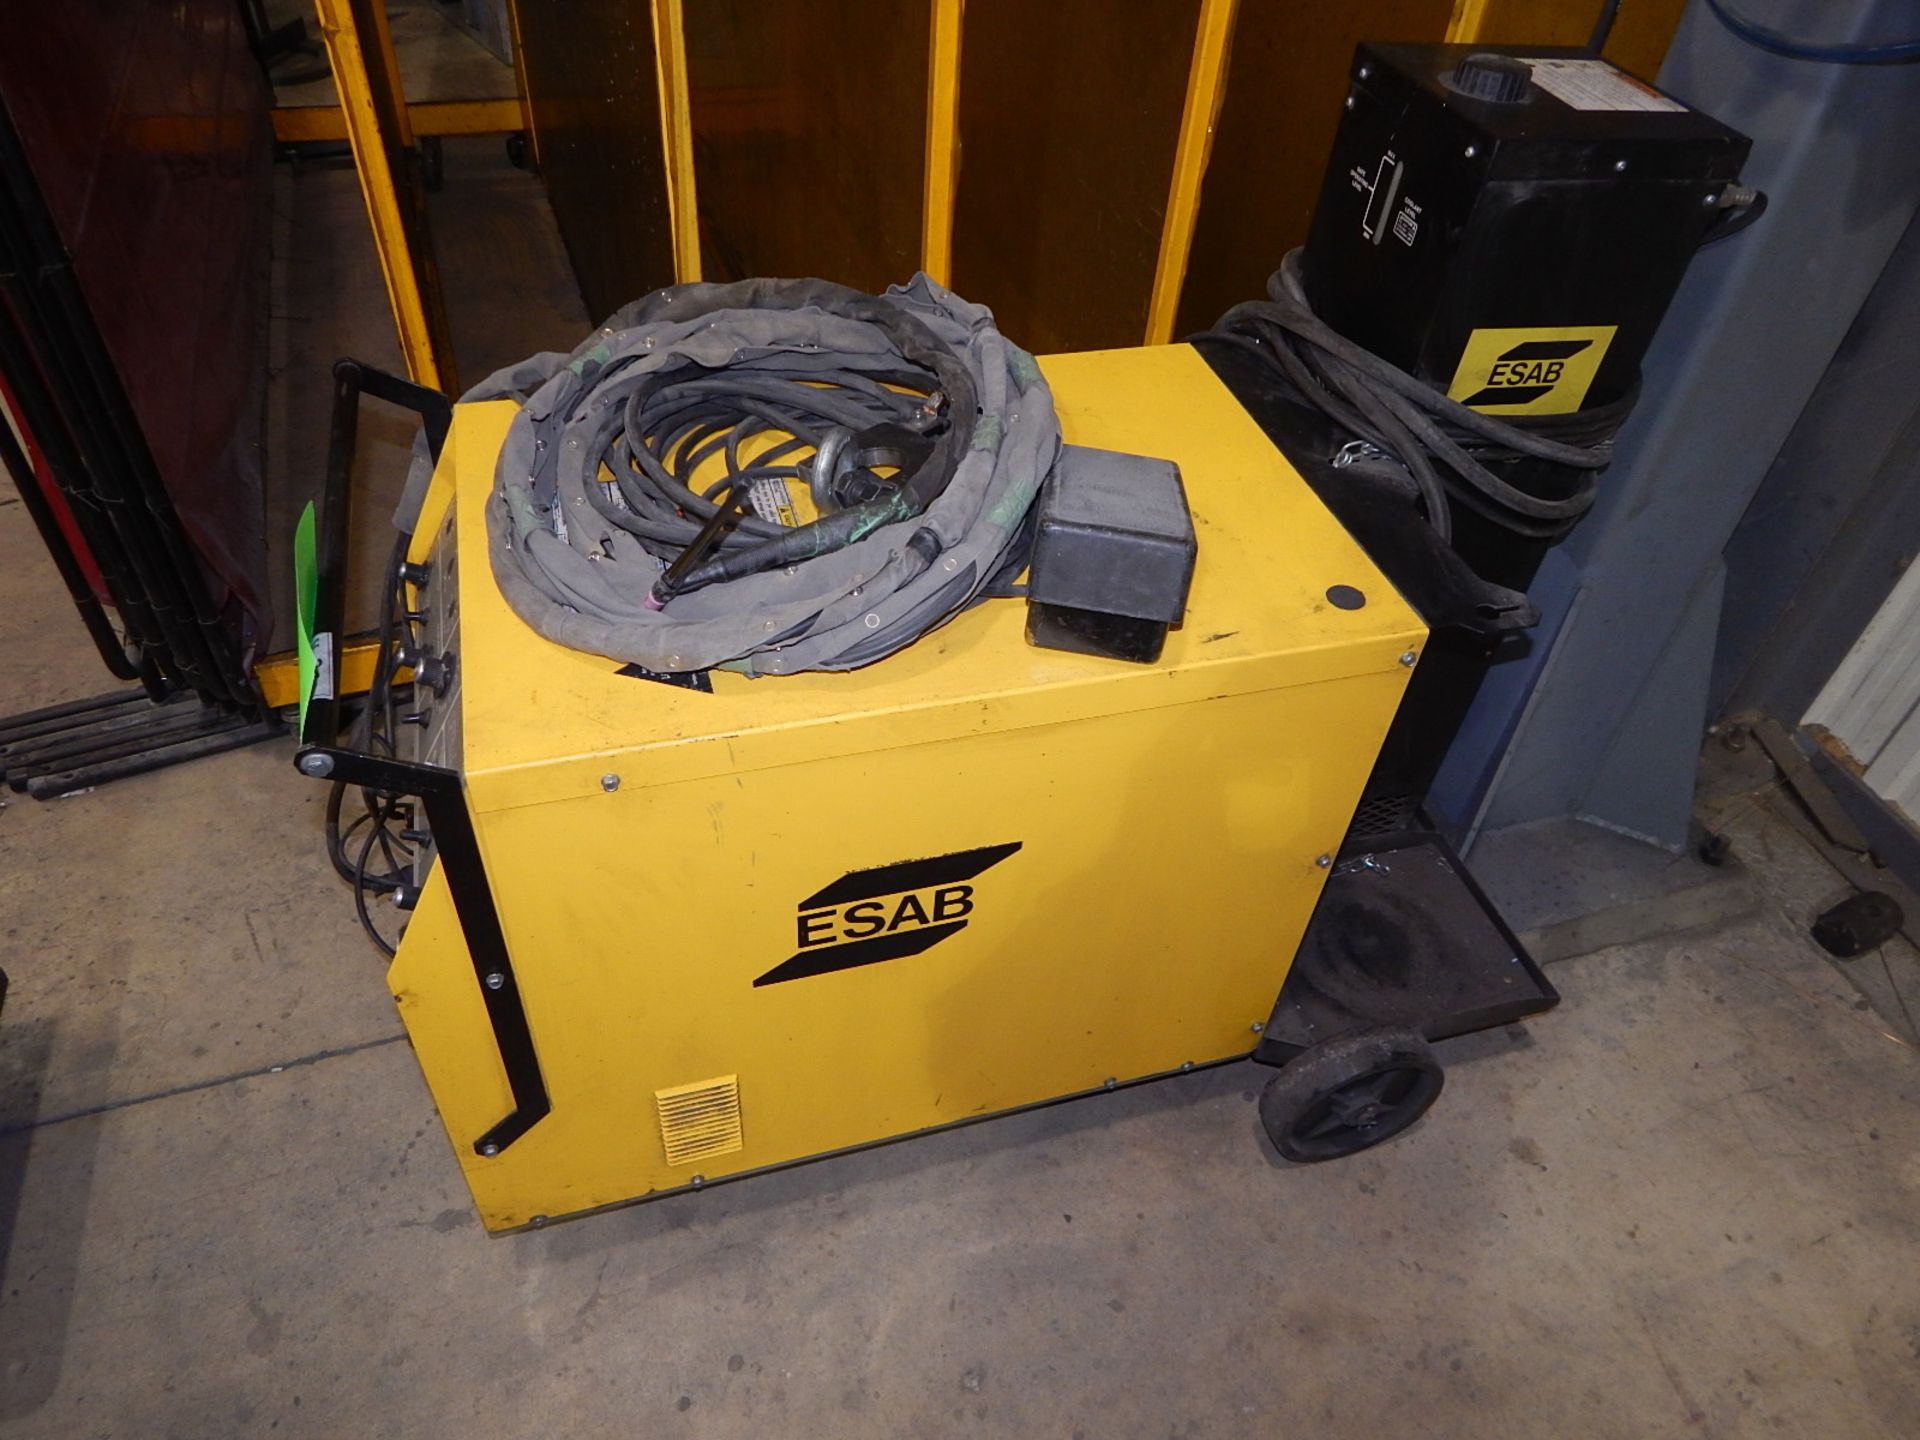 ESAB HELIARC 252 AC/DC ARC WELDER WITH COOLANT, CABLES AND GUN, S/N: TL-J209001 - Image 4 of 4